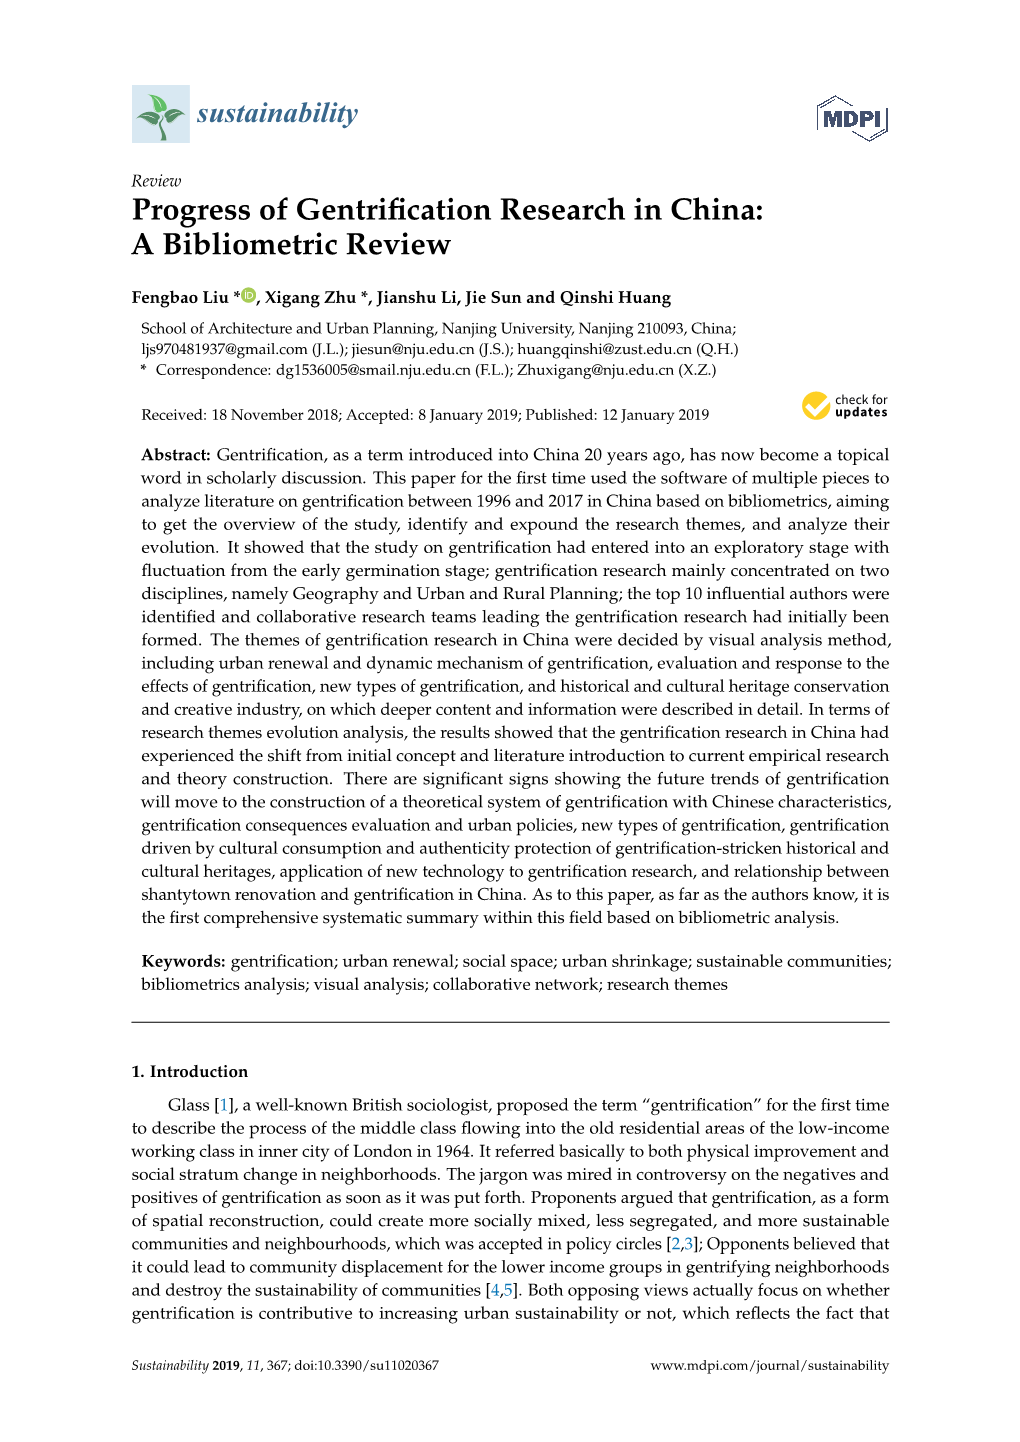 Progress of Gentrification Research in China: a Bibliometric Review